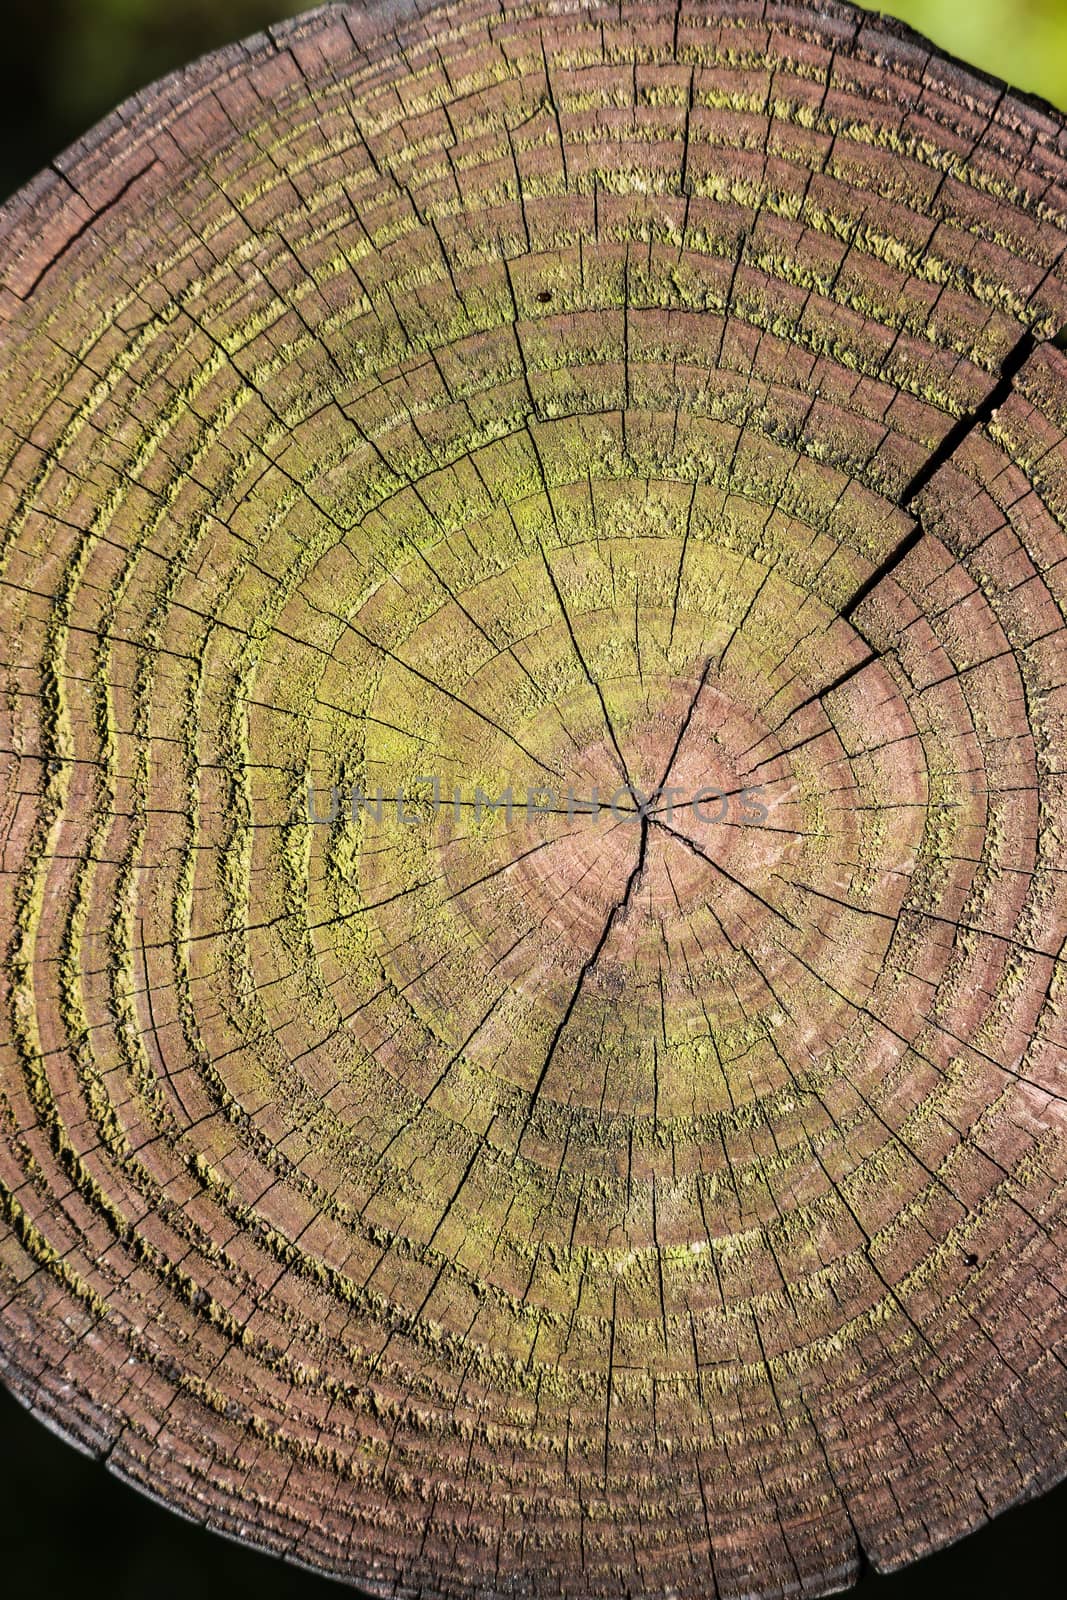 Detail of annual rings of a tree trunk in the forest